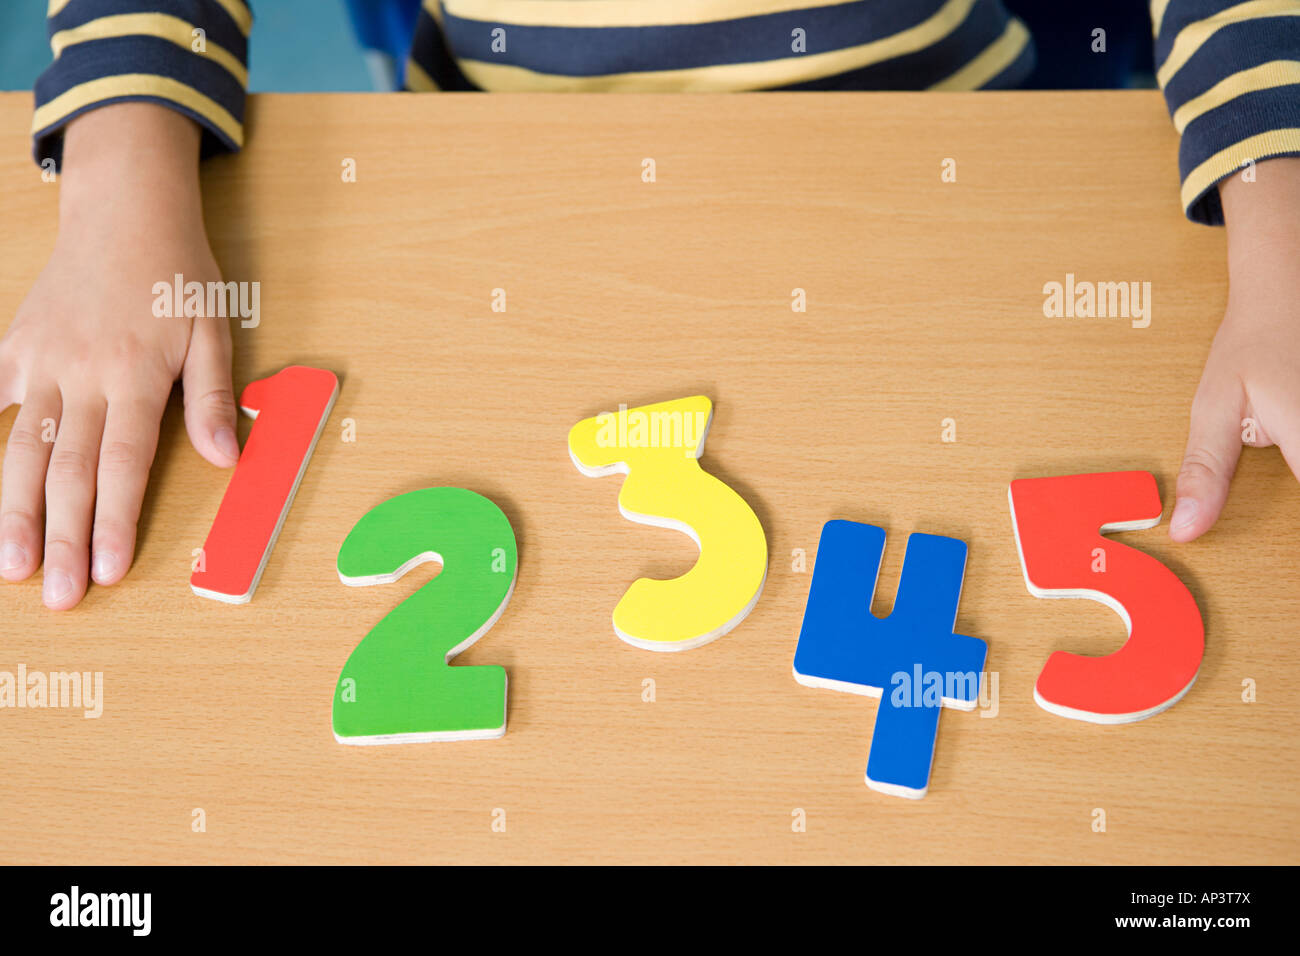 Numbers on a table Stock Photo